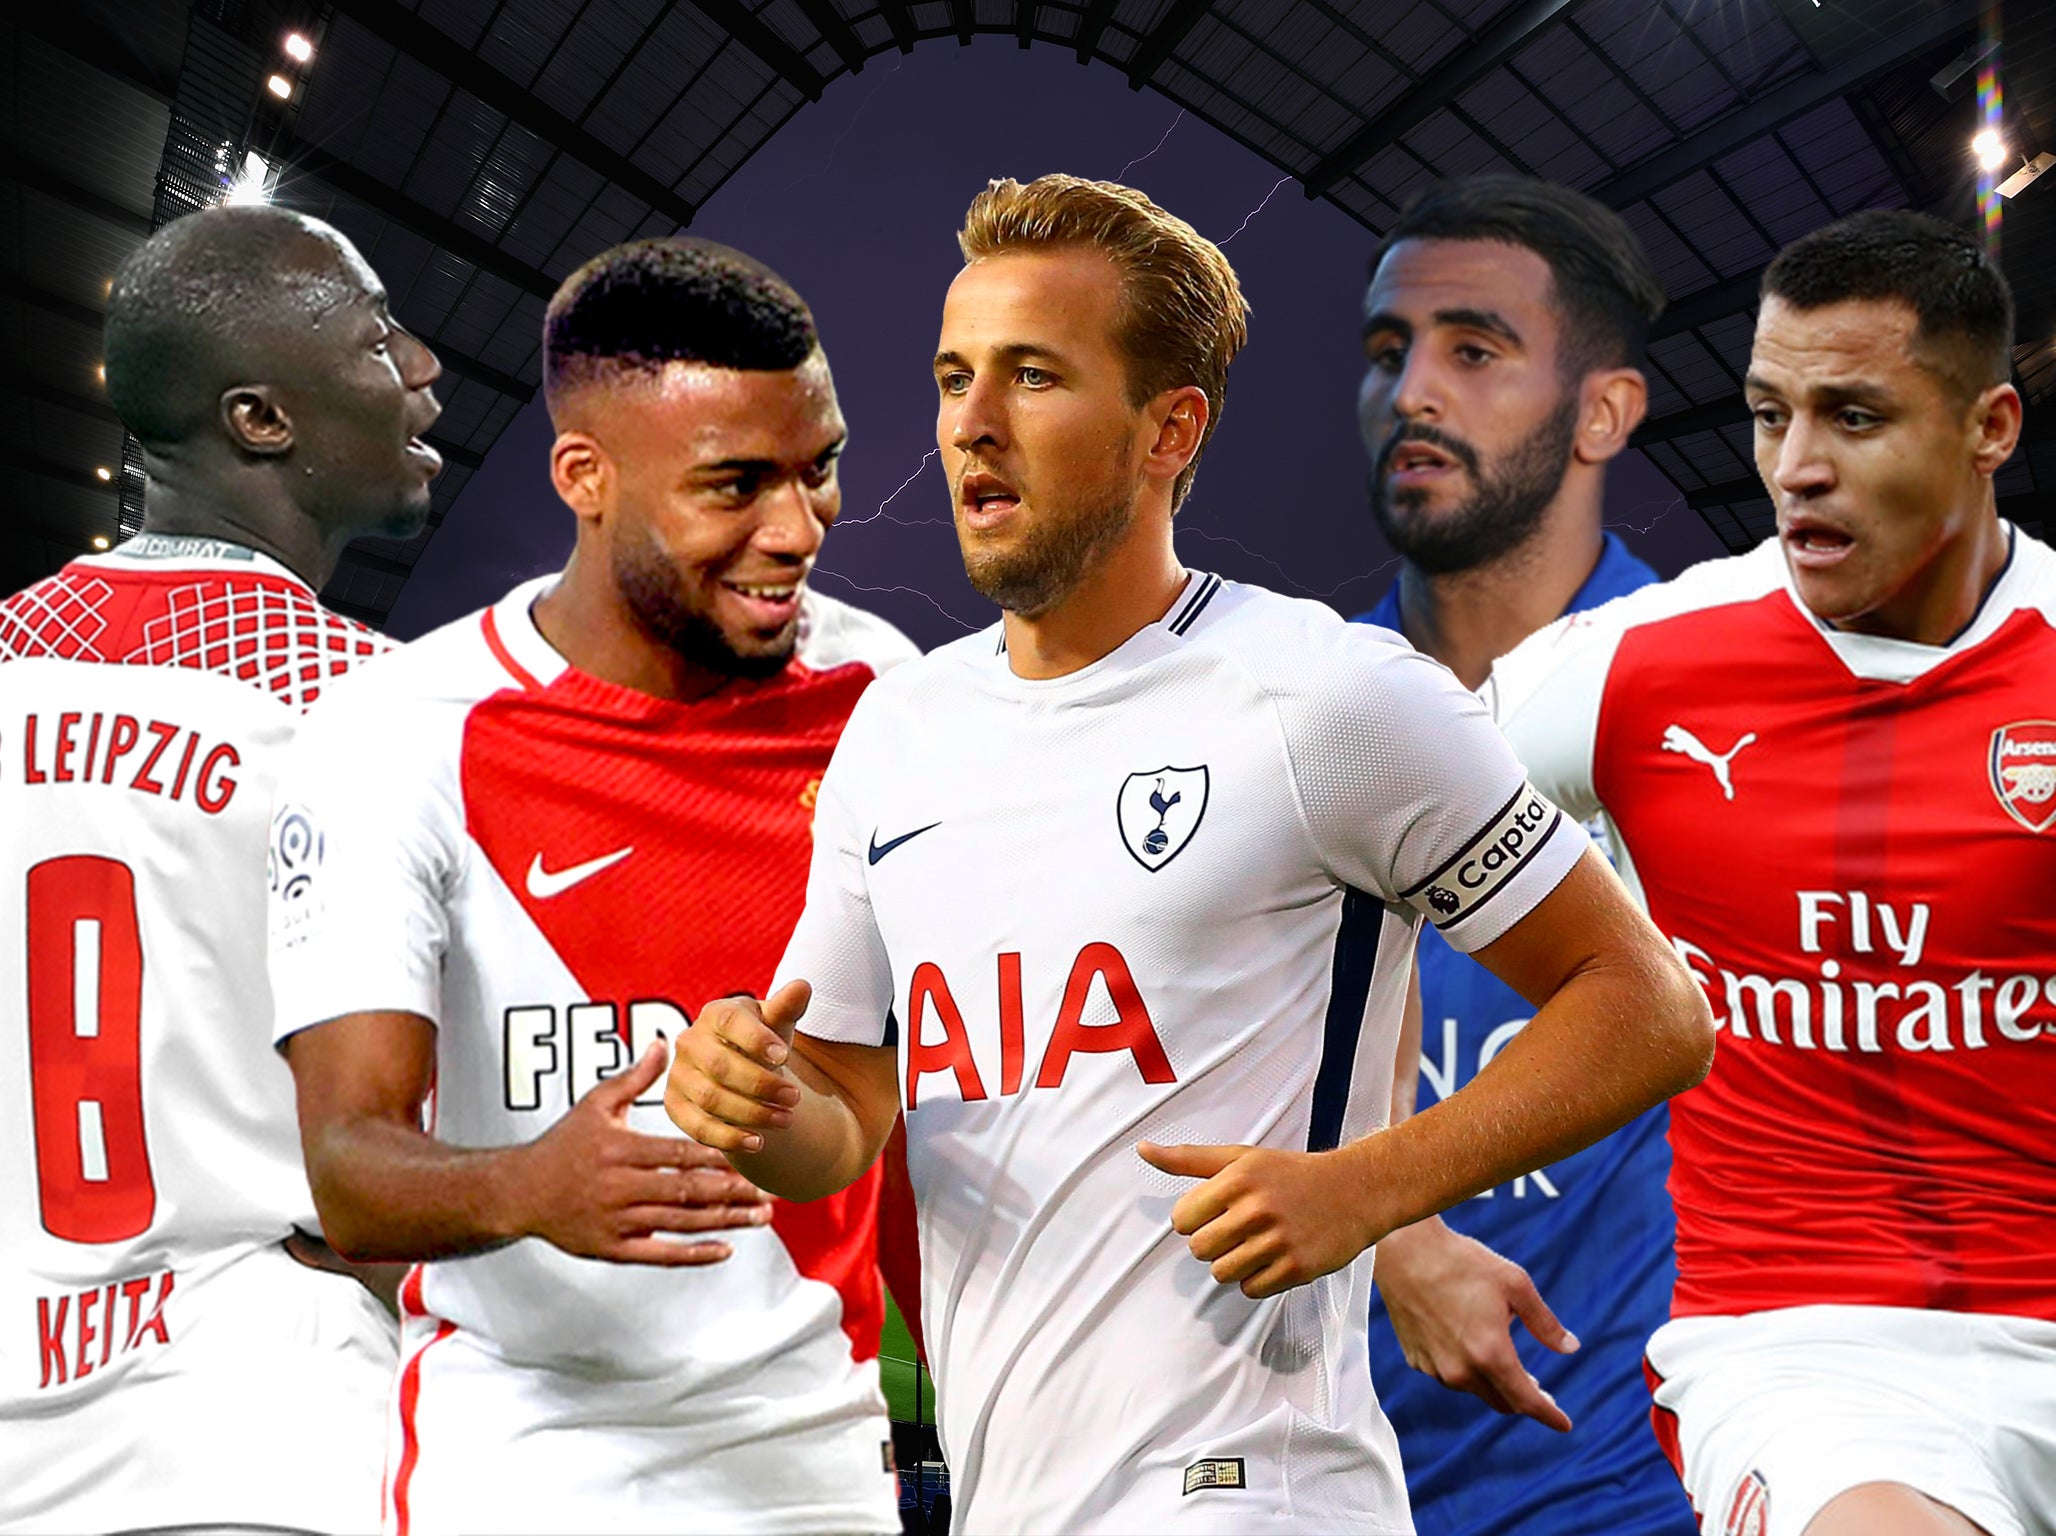 Transfer news LIVE: Liverpool, Manchester United and Arsenal latest as City close in on Alexis Sanchez